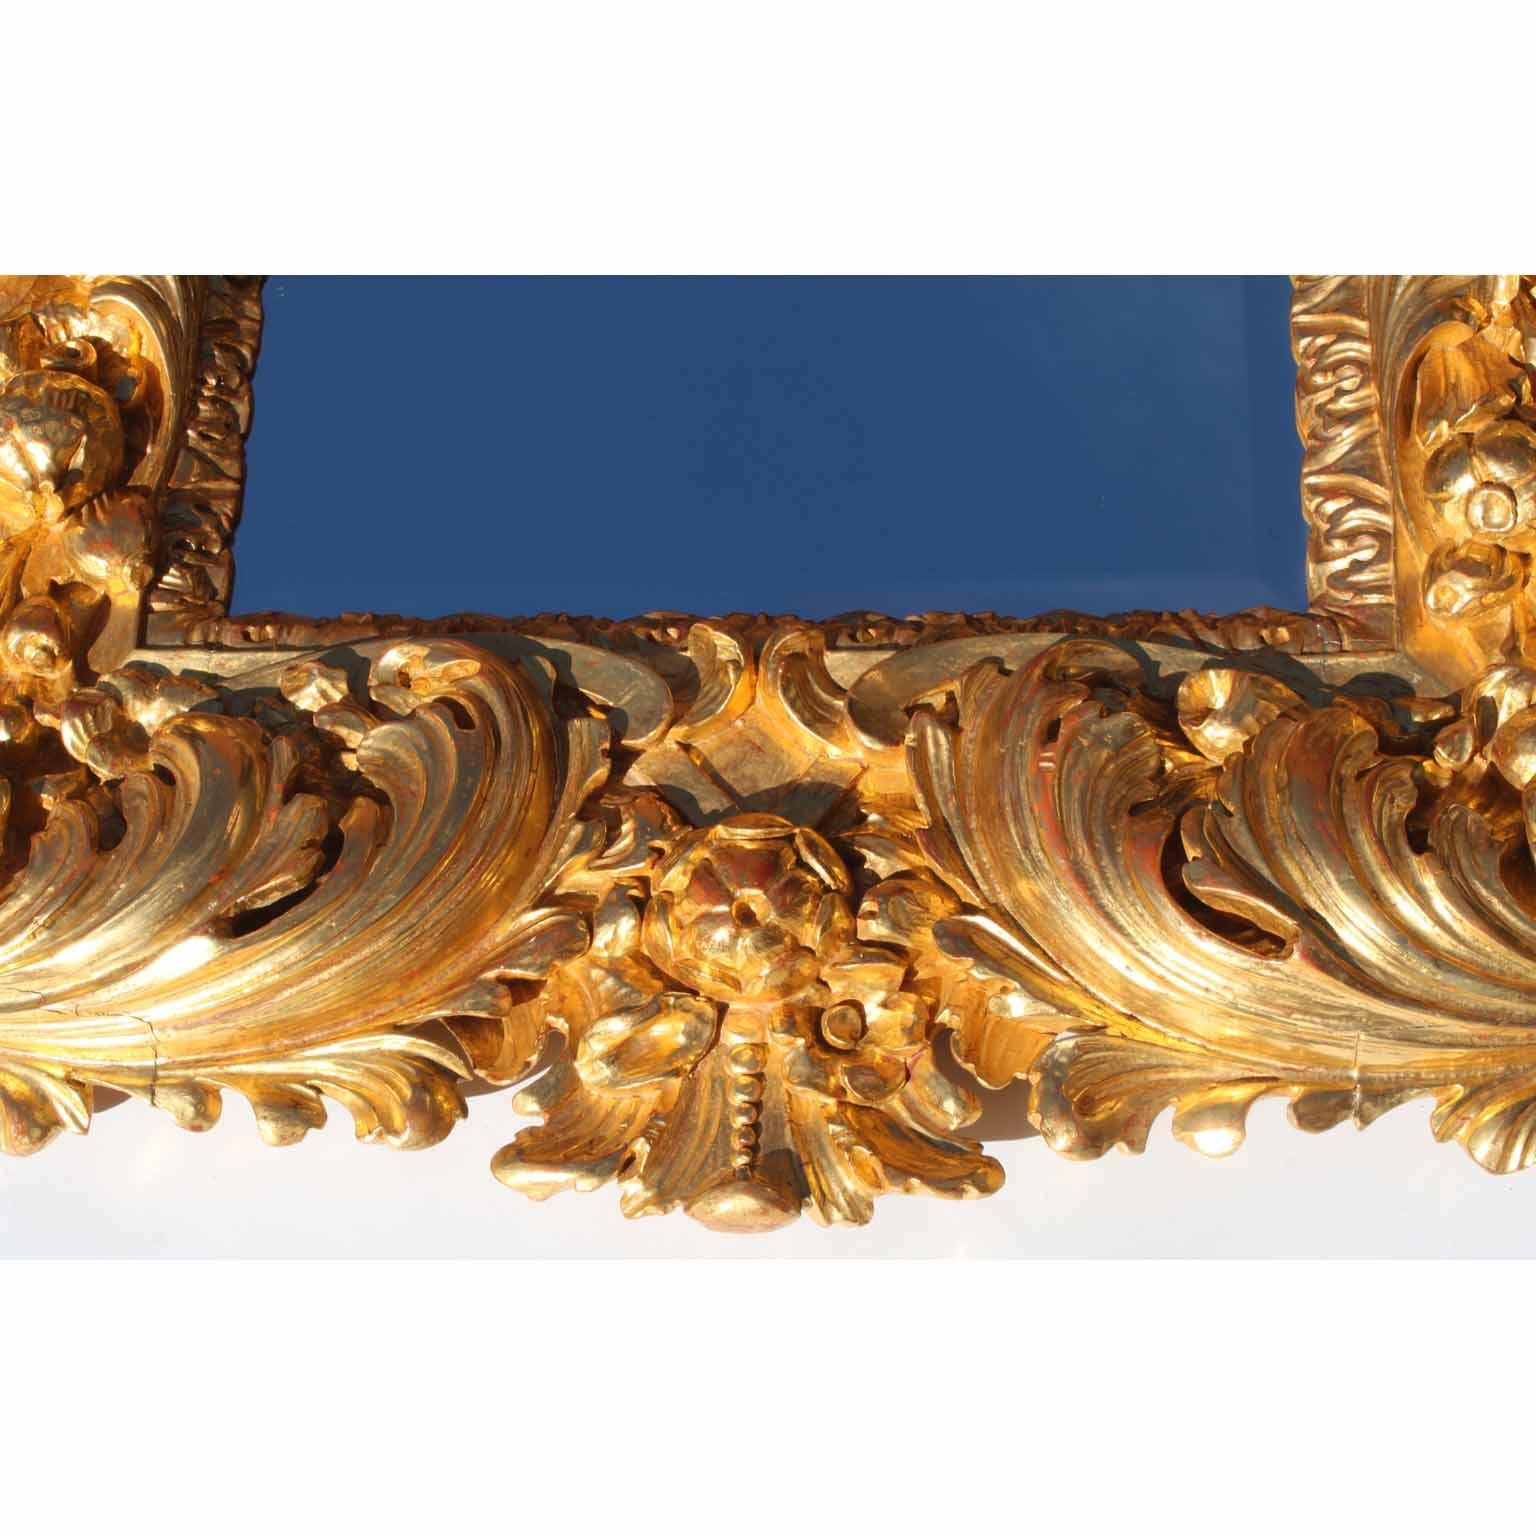 Palatial Italian 19th Century Baroque Style Giltwood Carved Florentine Mirror For Sale 2